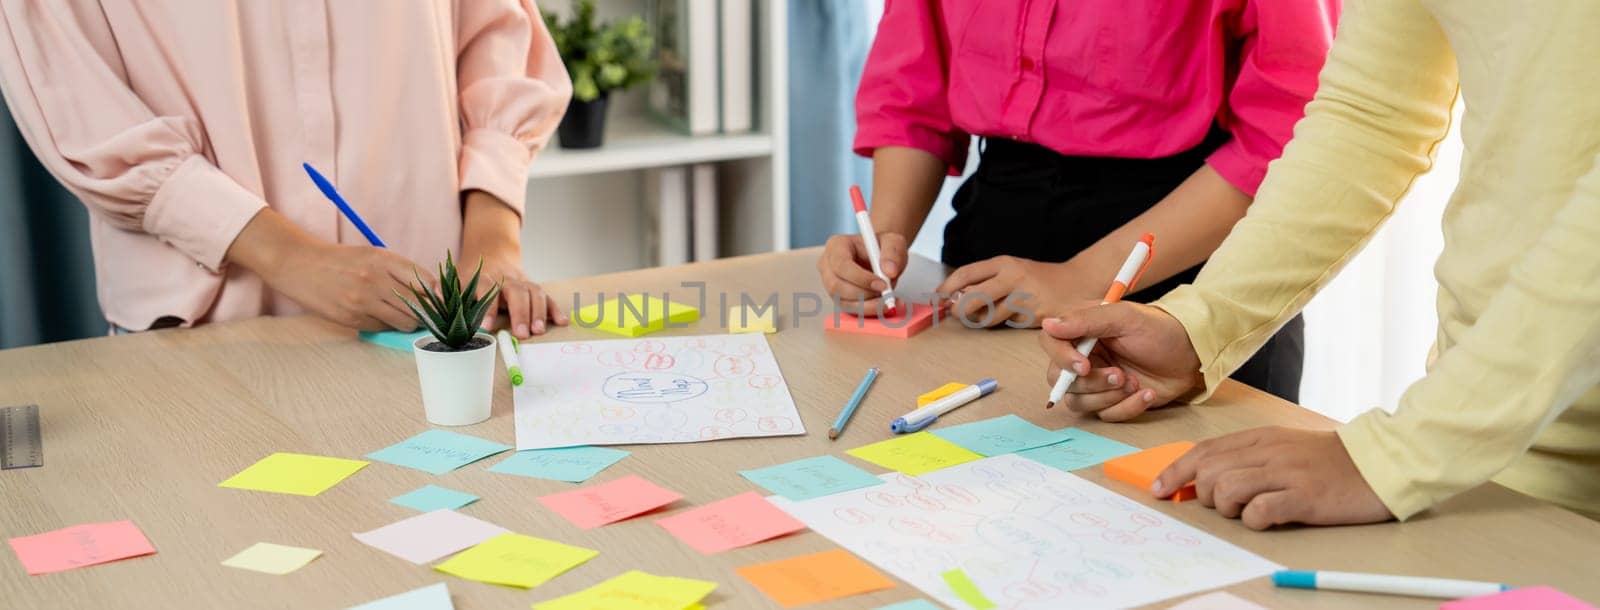 Young business group brainstorms ideas on colorful sticky notes. Variegated. by biancoblue